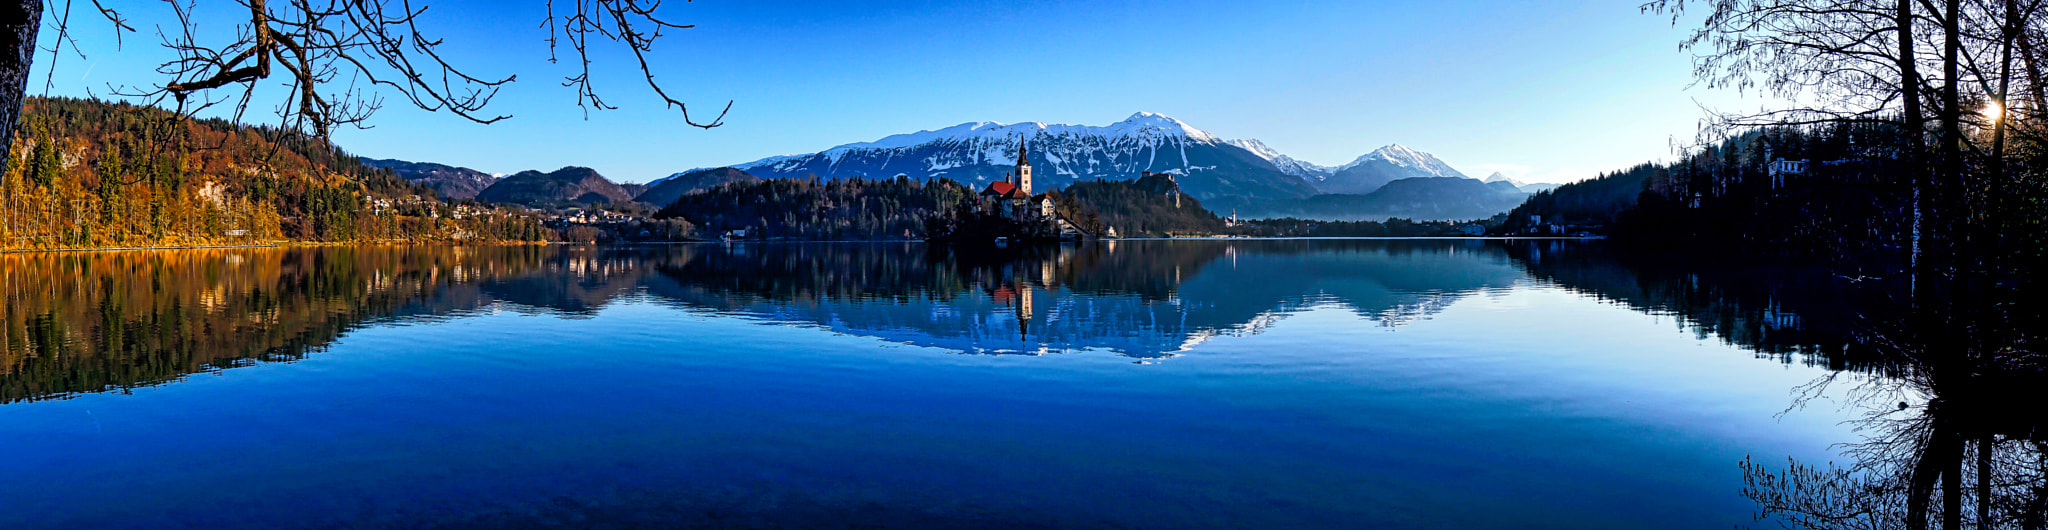 Sony a6000 + Sony E 10-18mm F4 OSS sample photo. Lake bled panorama photography